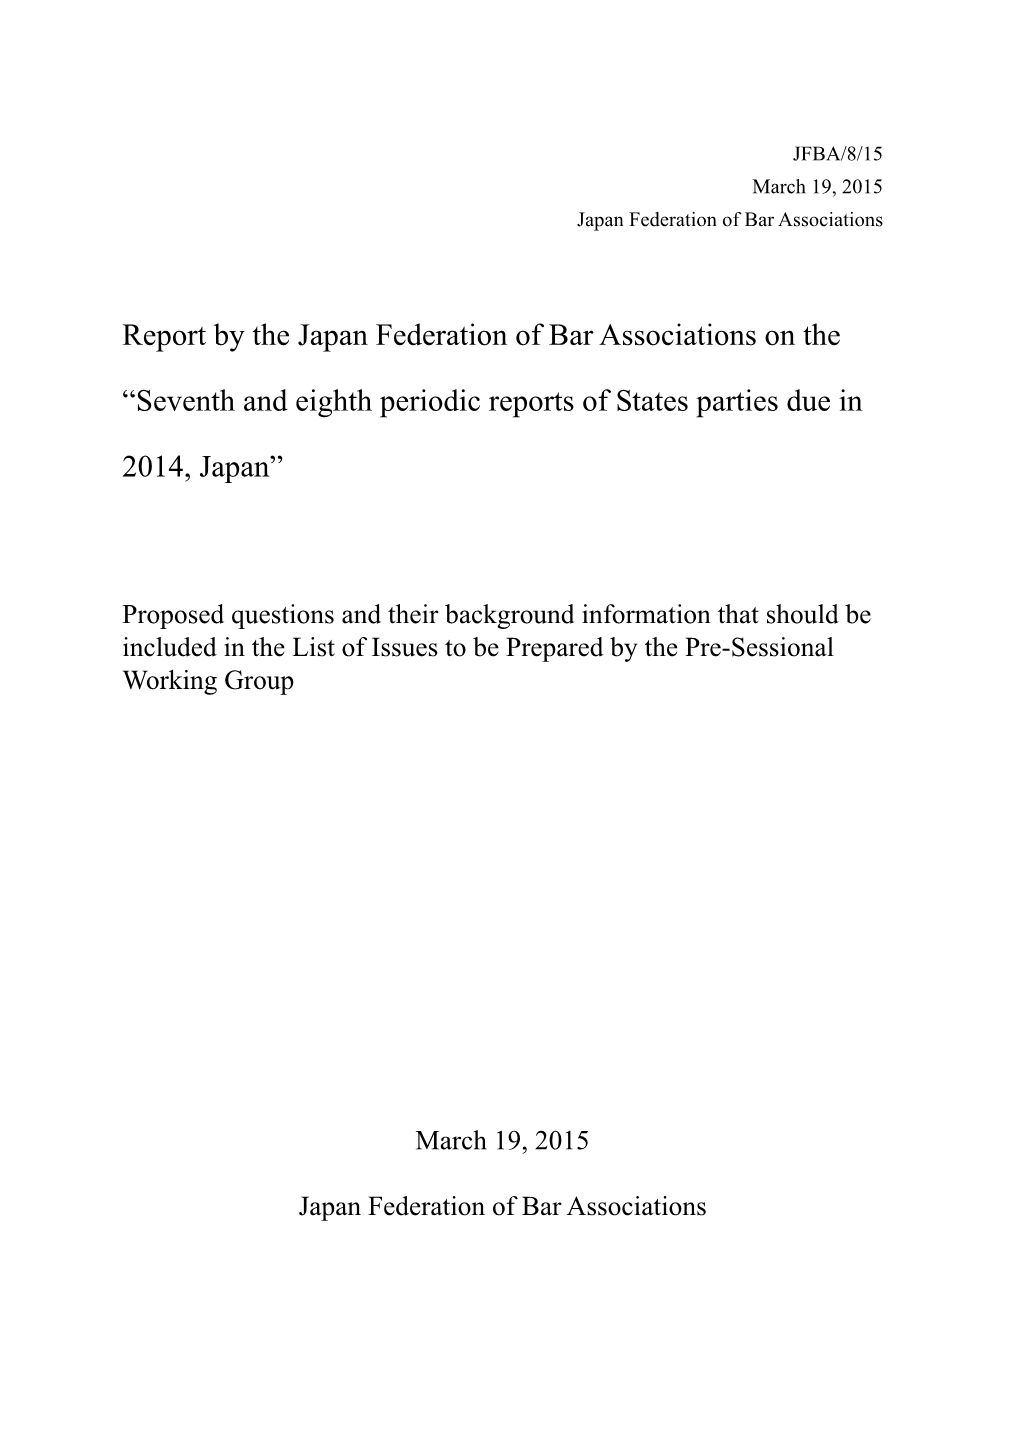 Report by the Japan Federation of Bar Associations on The